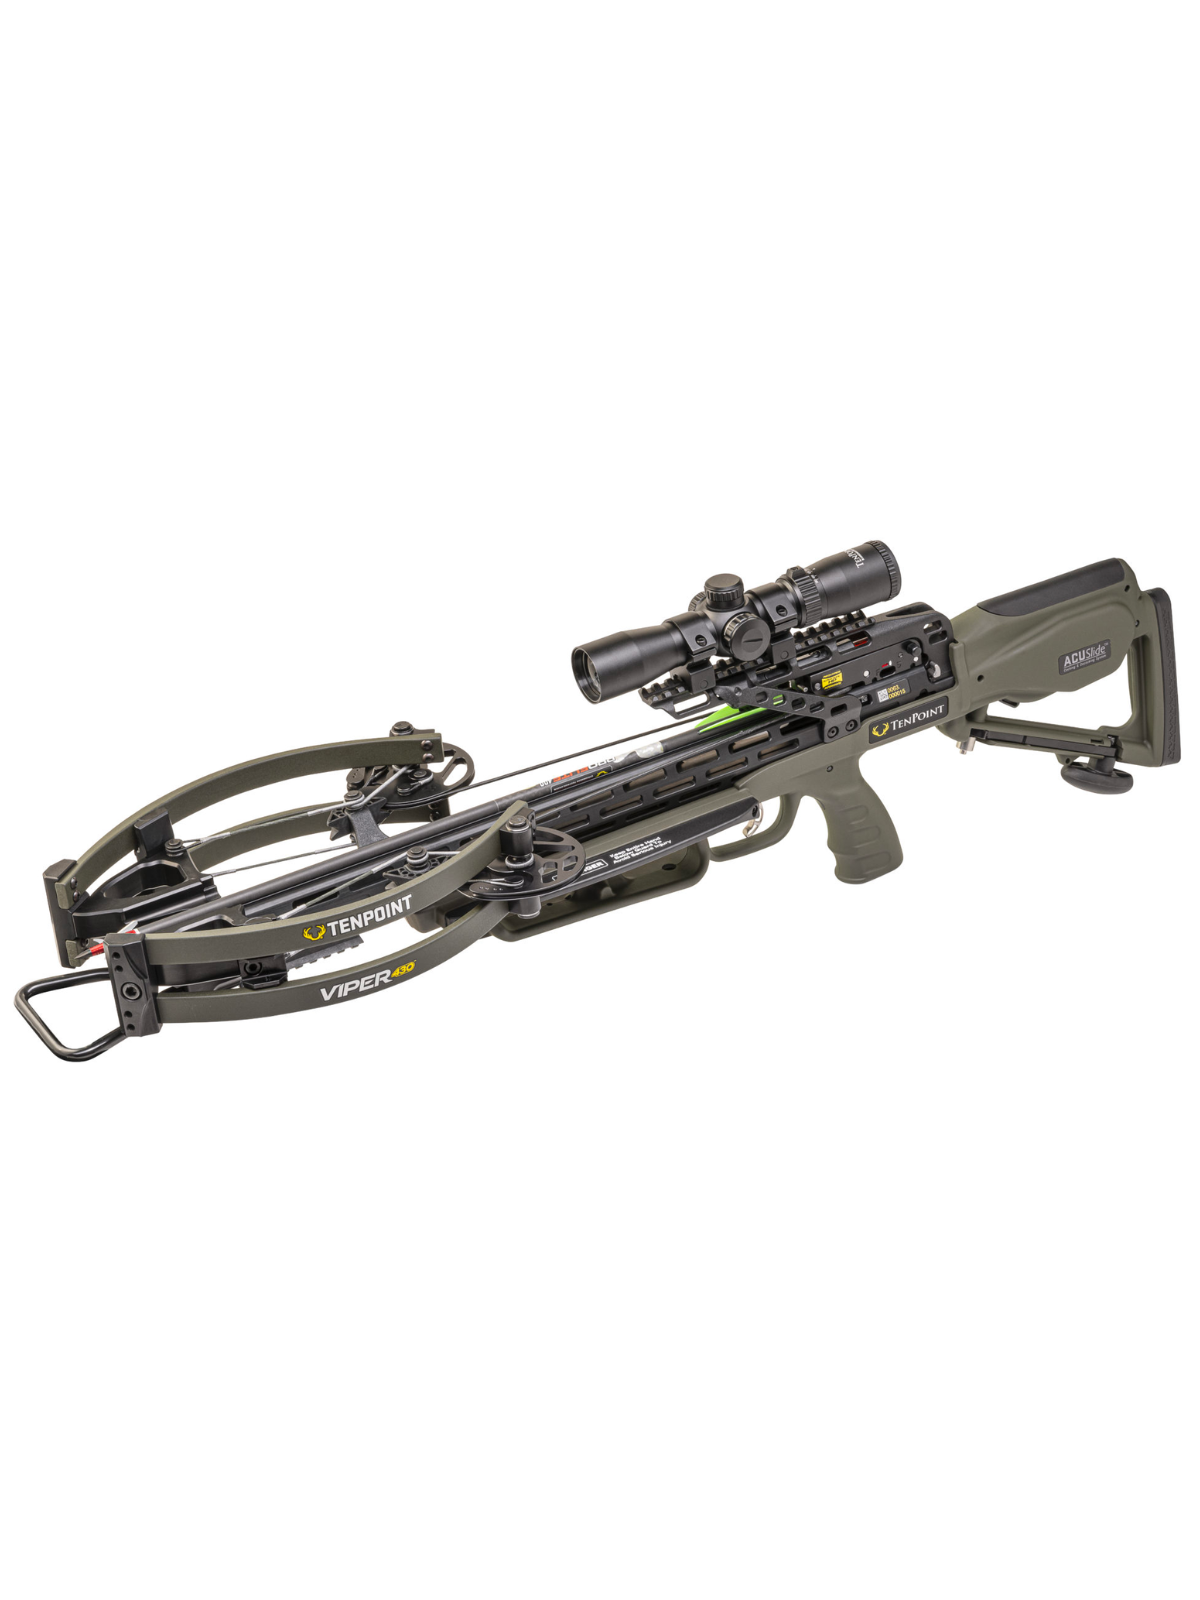 TenPoint Viper 430 Compound Crossbow Package